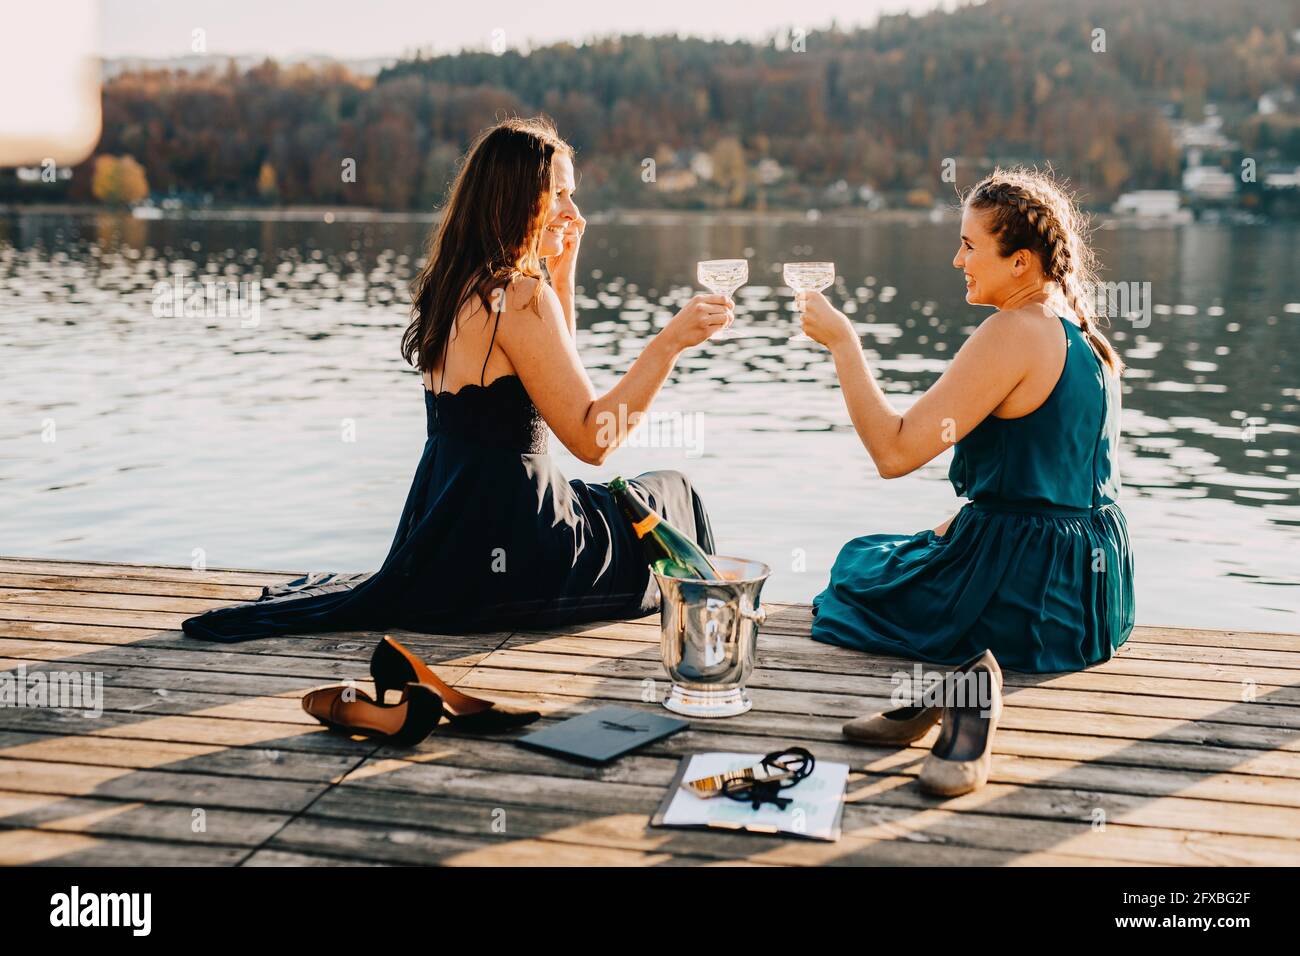 Female event planners toasting champagne while sitting on jetty over lake Stock Photo